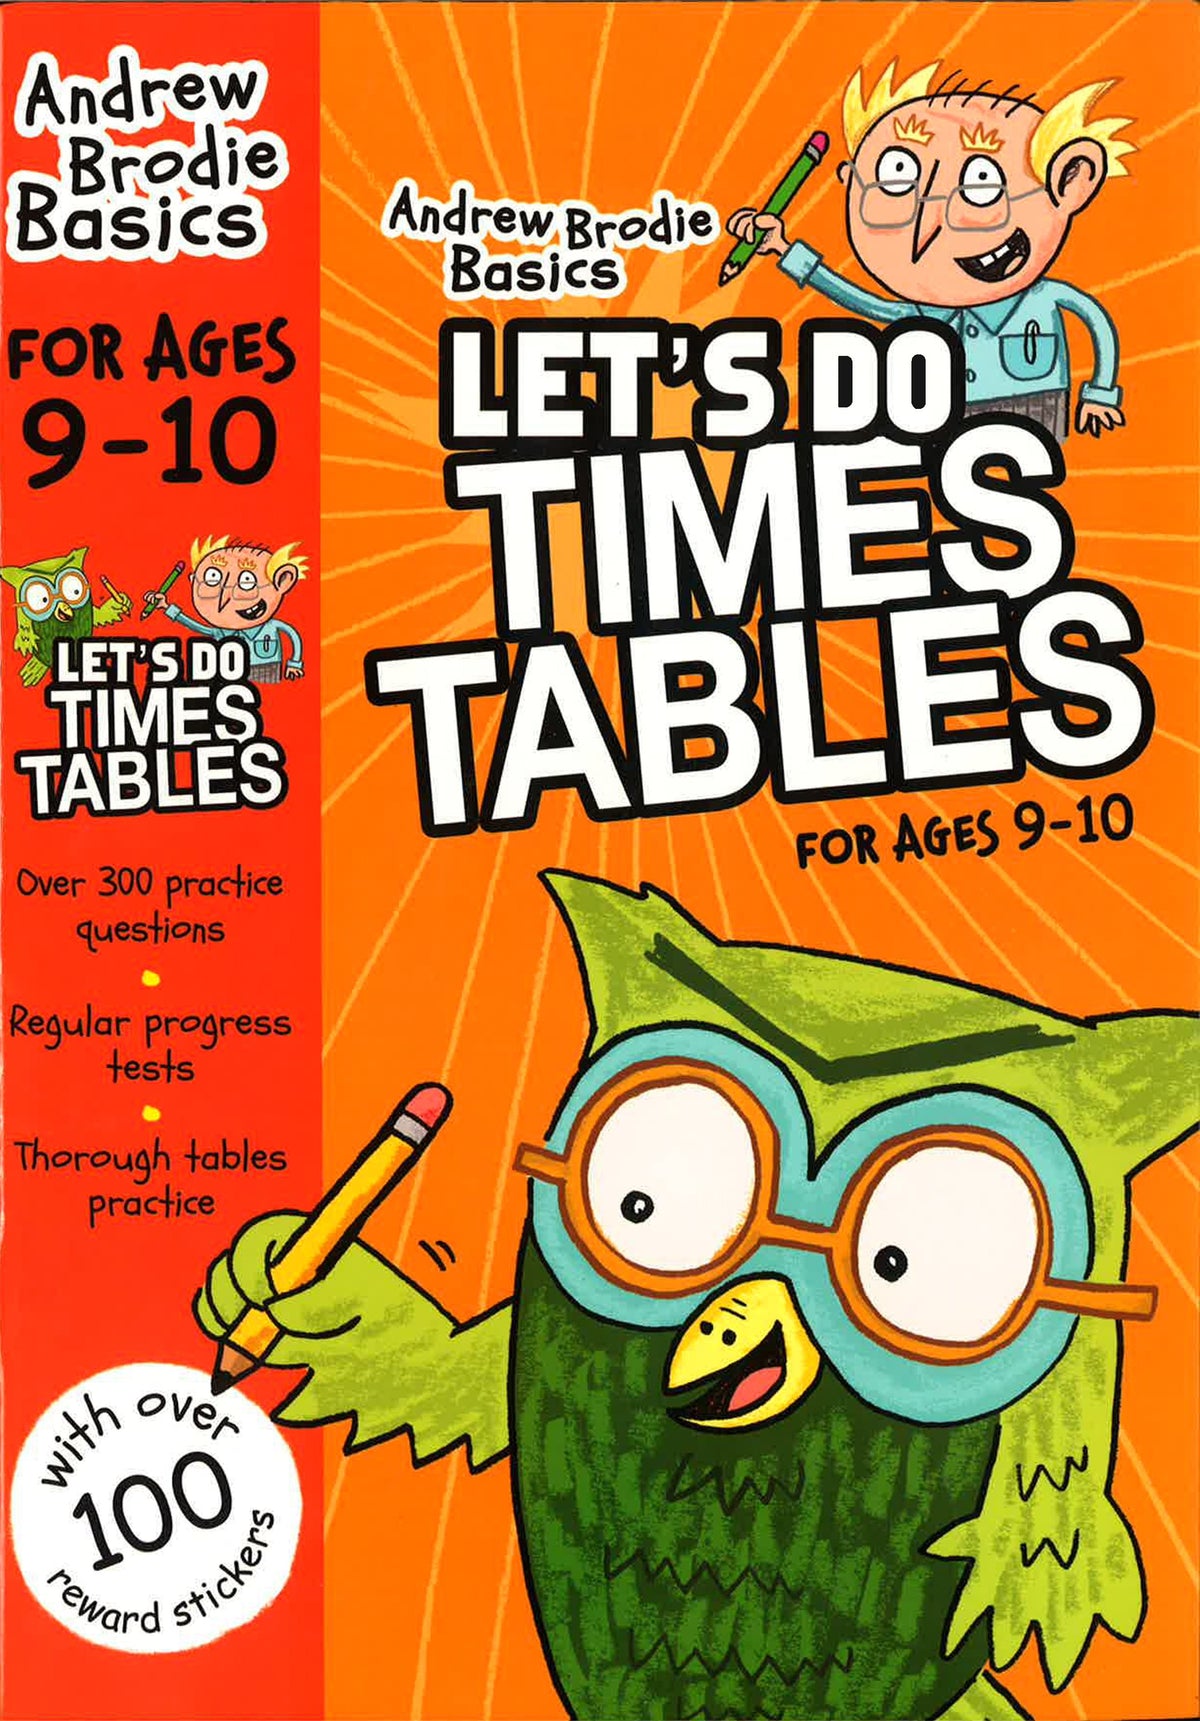 andrew-brodie-basics-let-s-do-times-tables-for-ages-9-10-big-bad-wolf-books-sdn-bhd-philippines